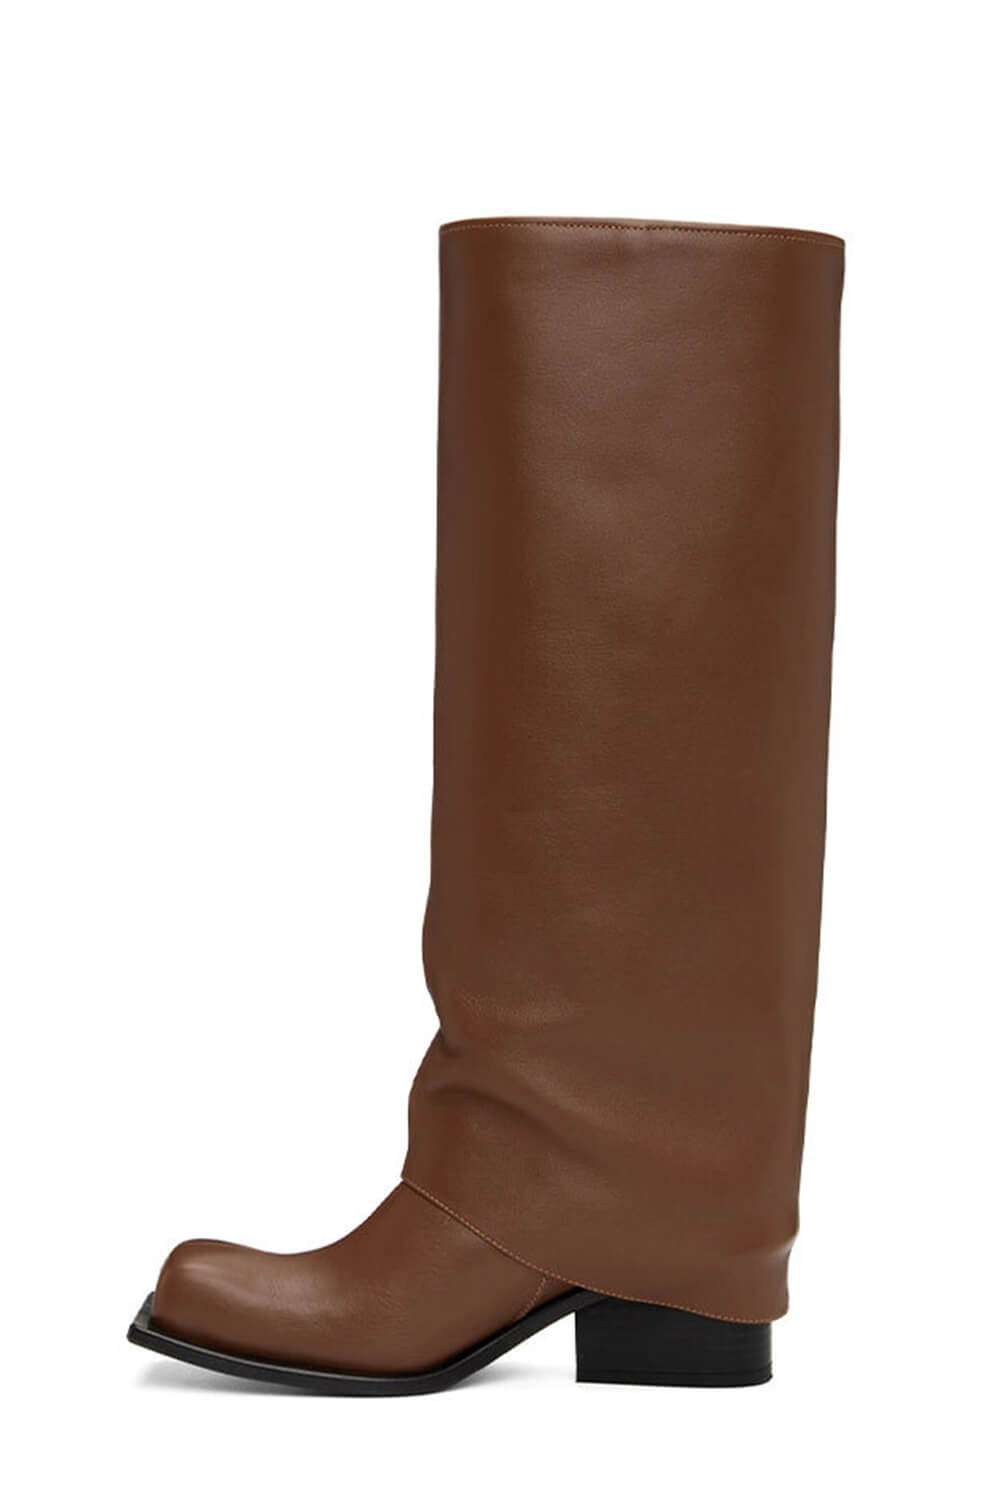 Faux Leather Fold Over Ruched Square Toe Platform Knee High Boots - Brown